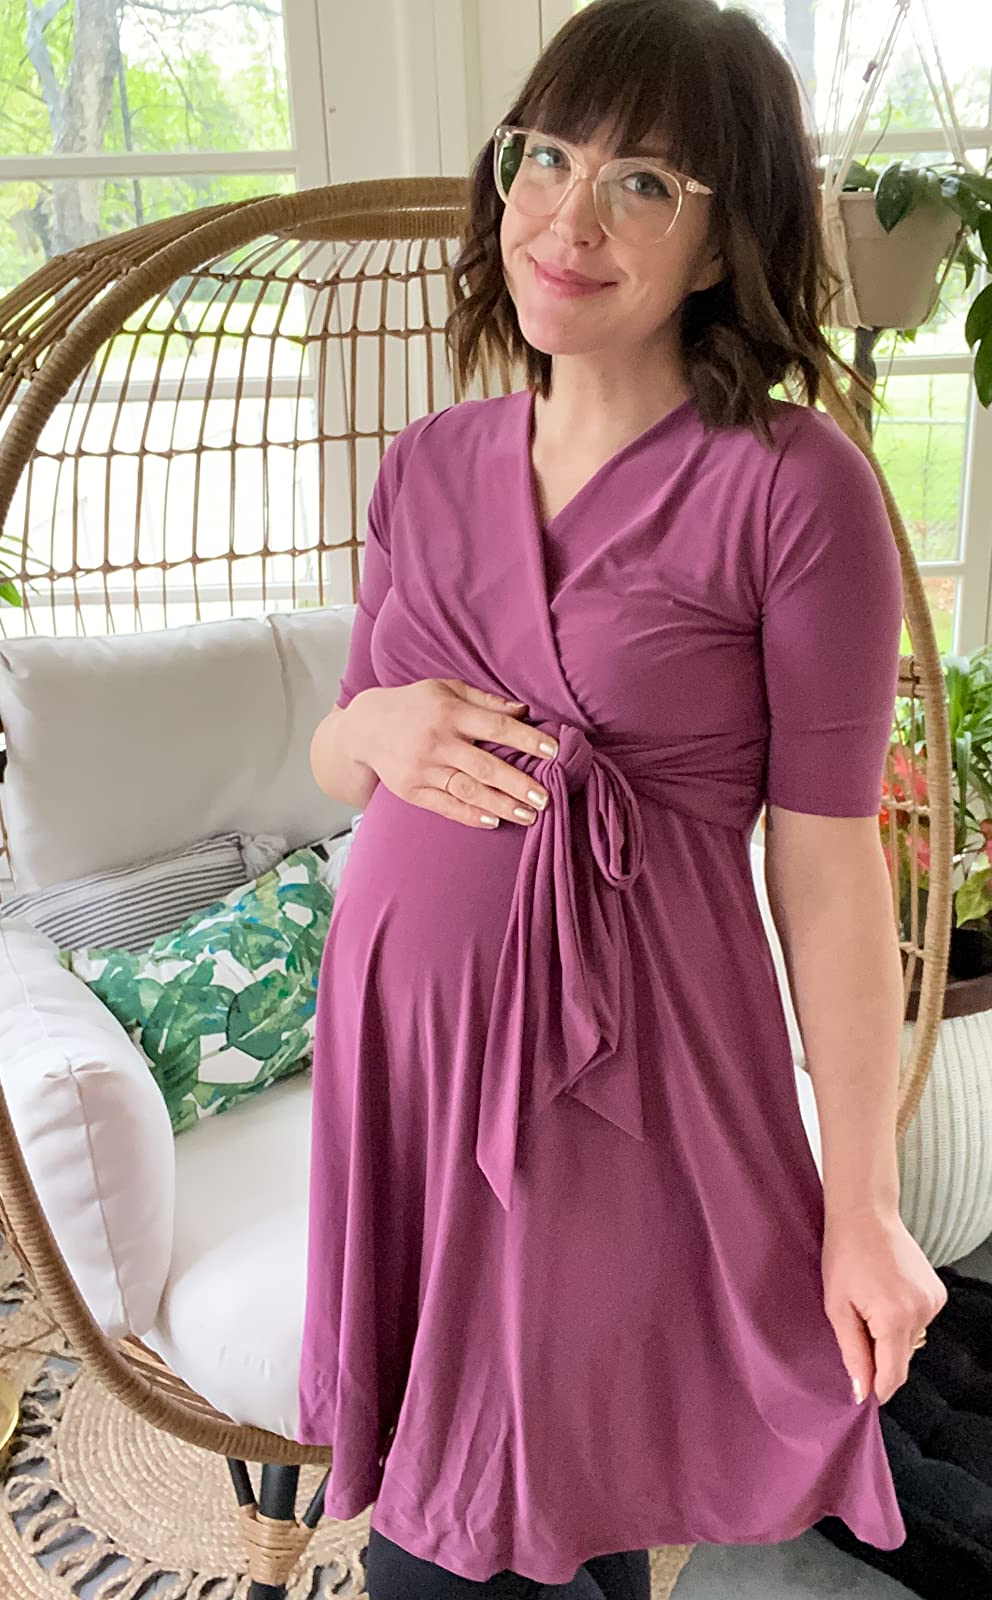 Green Ruched Fitted Front Bow Maternity/Nursing Dress– PinkBlush